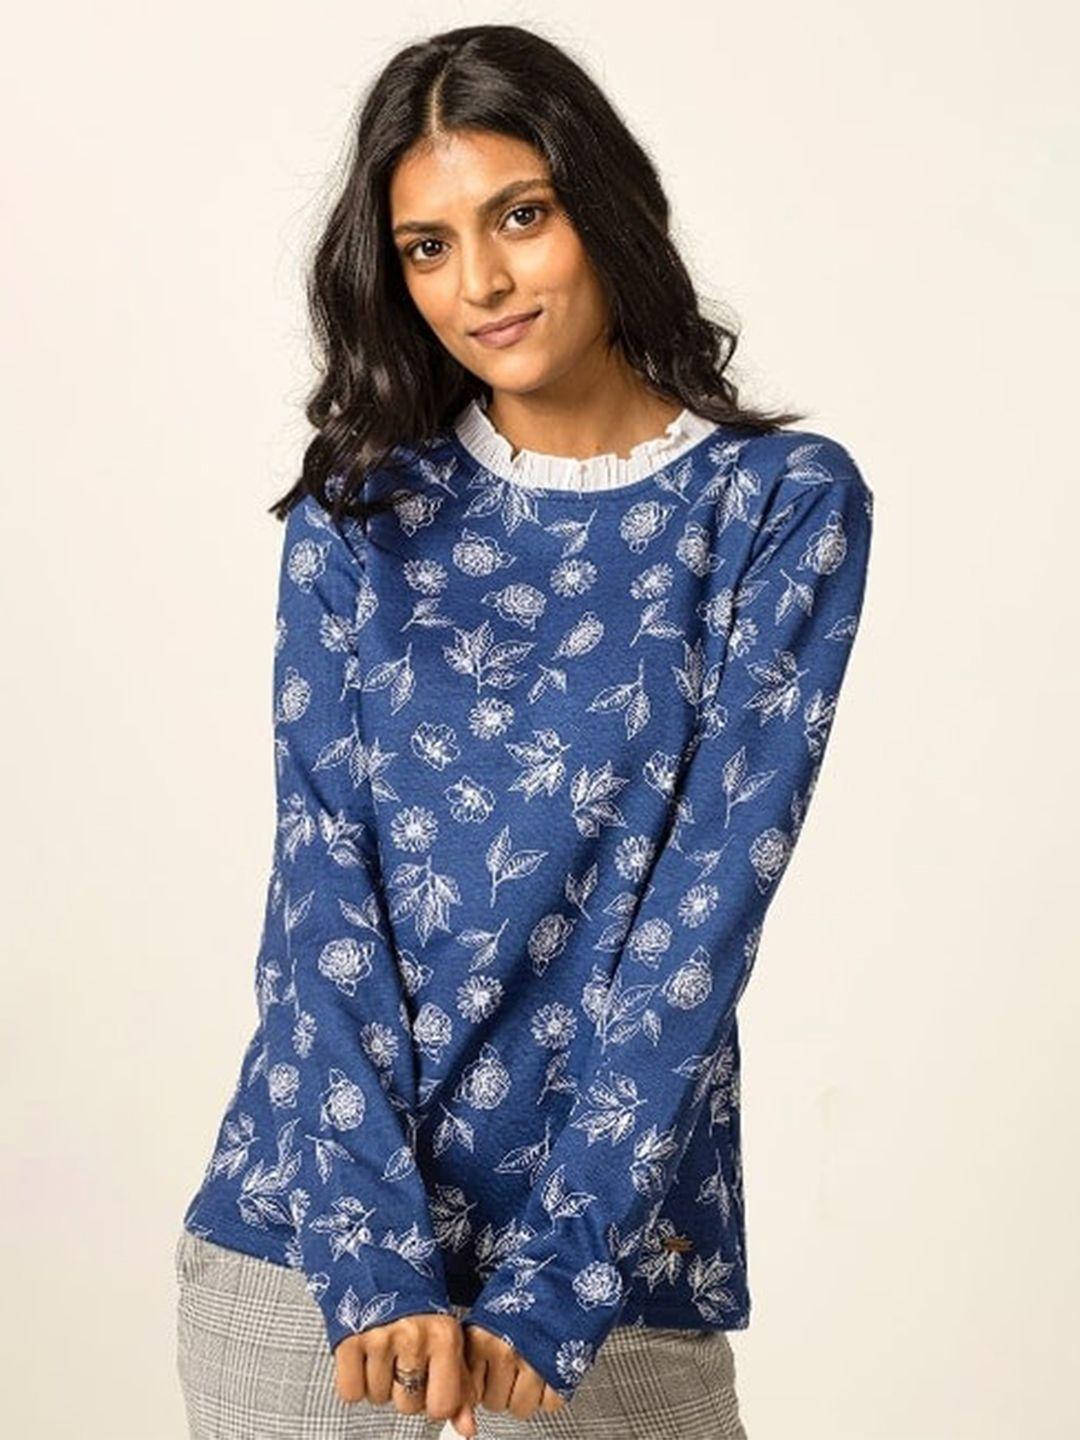 harbour 9 floral printed cotton pullover sweatshirt